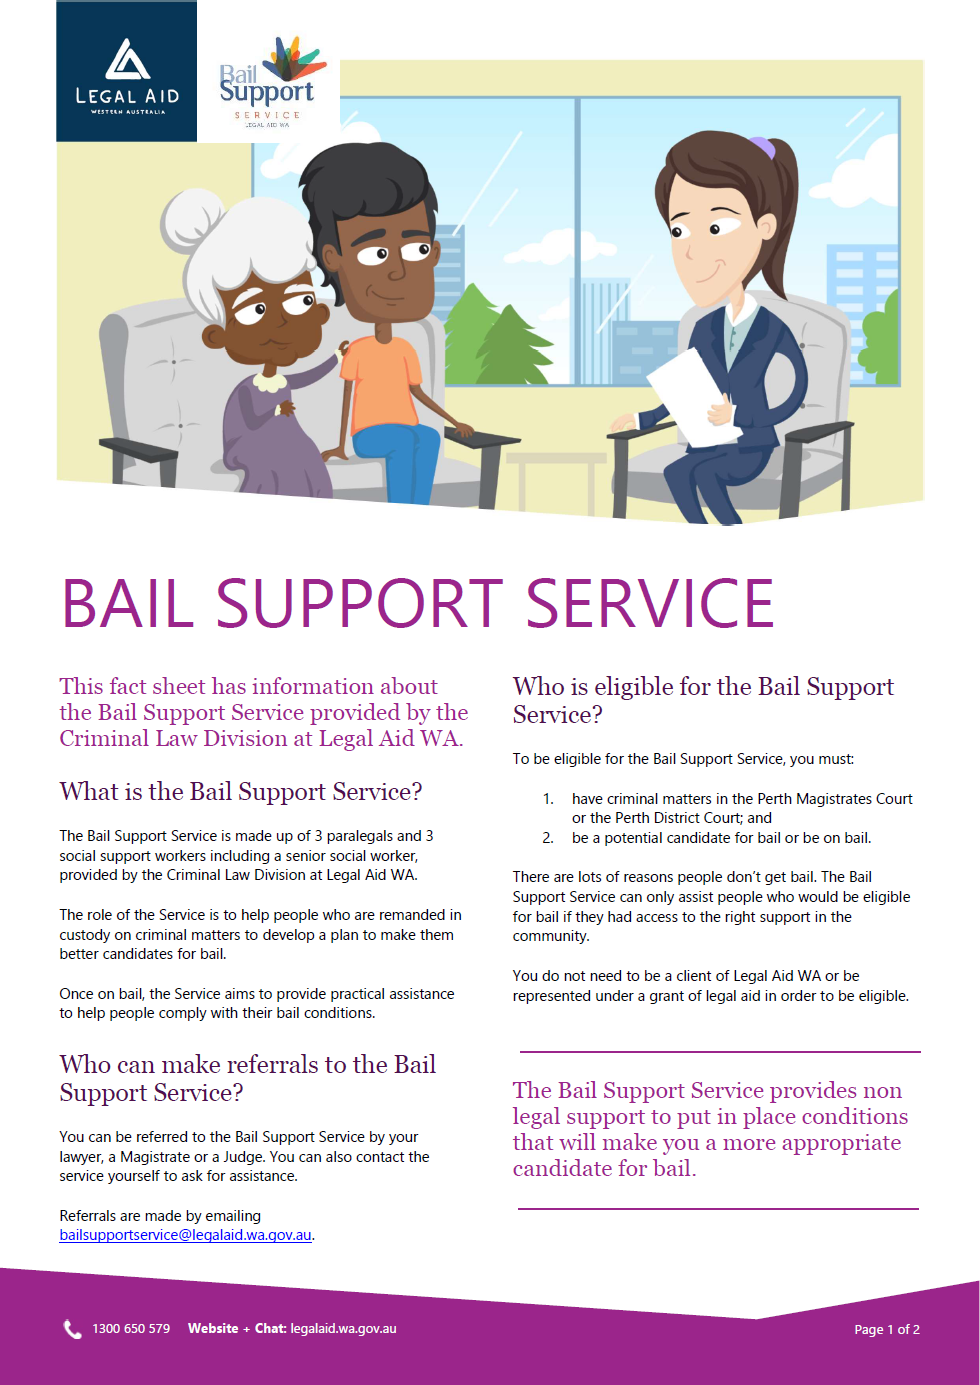 Thumbnail of Bail Support Service fact sheet